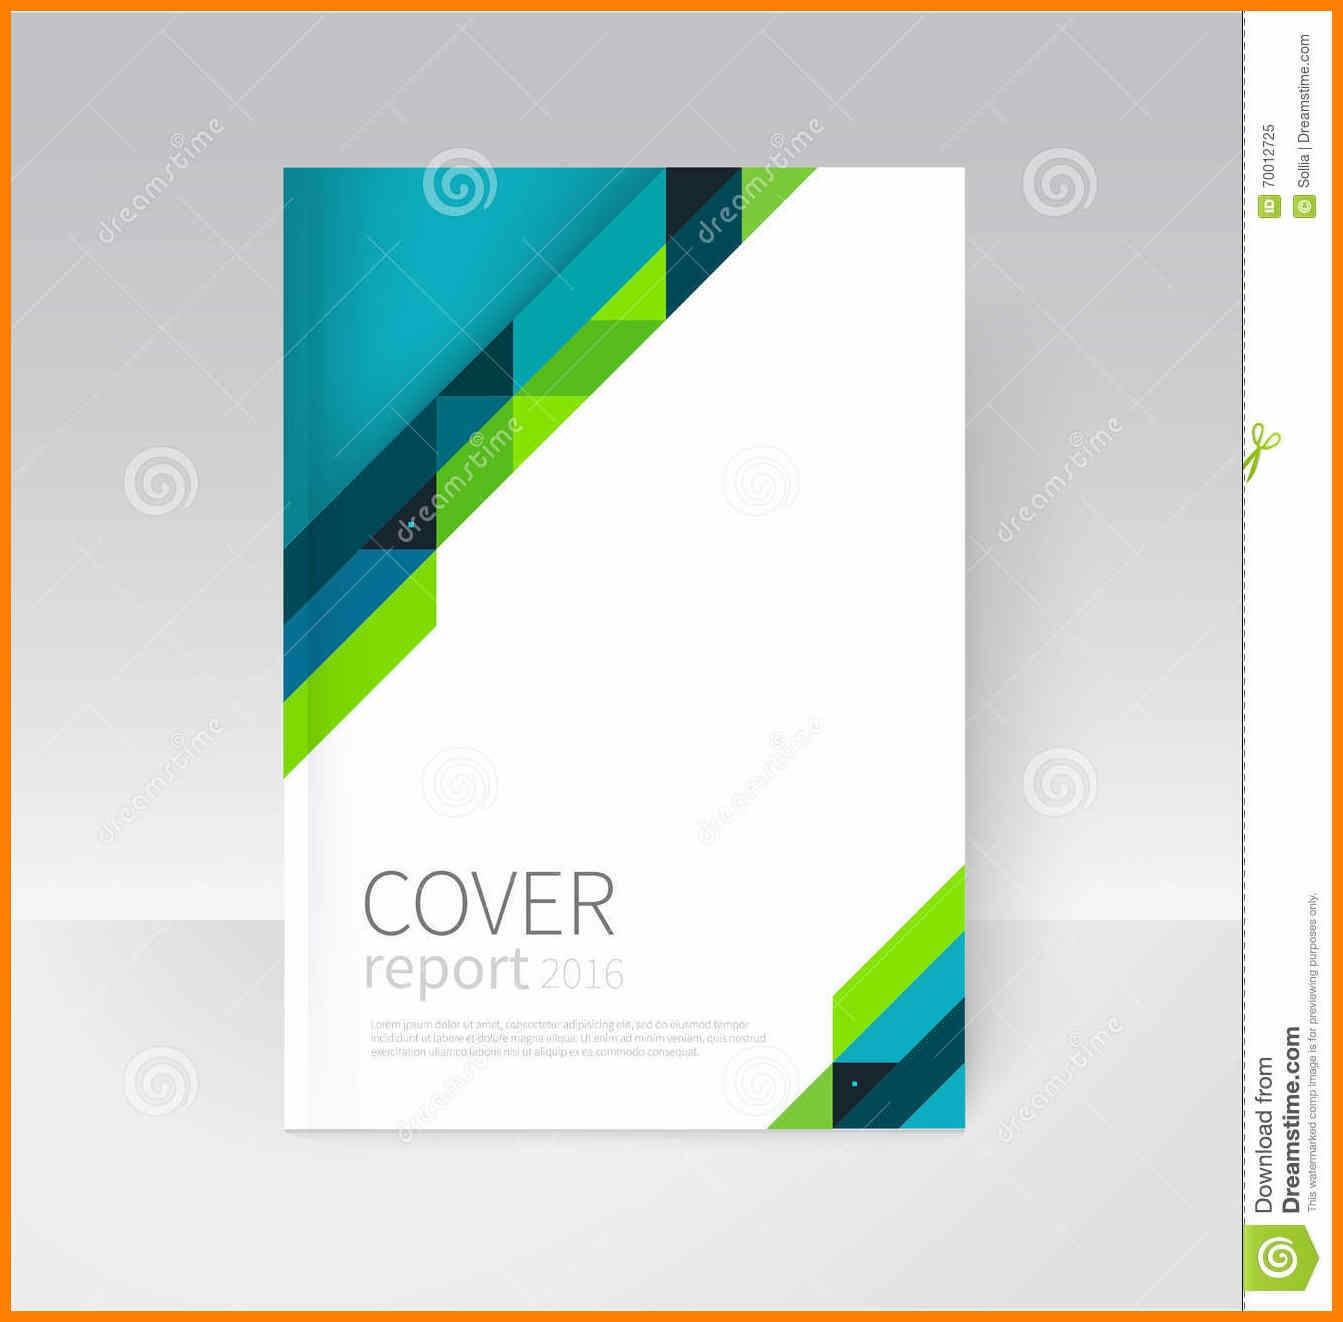 Microsoft Word Report Templates Free Download – Humman Within Microsoft Word Templates Reports